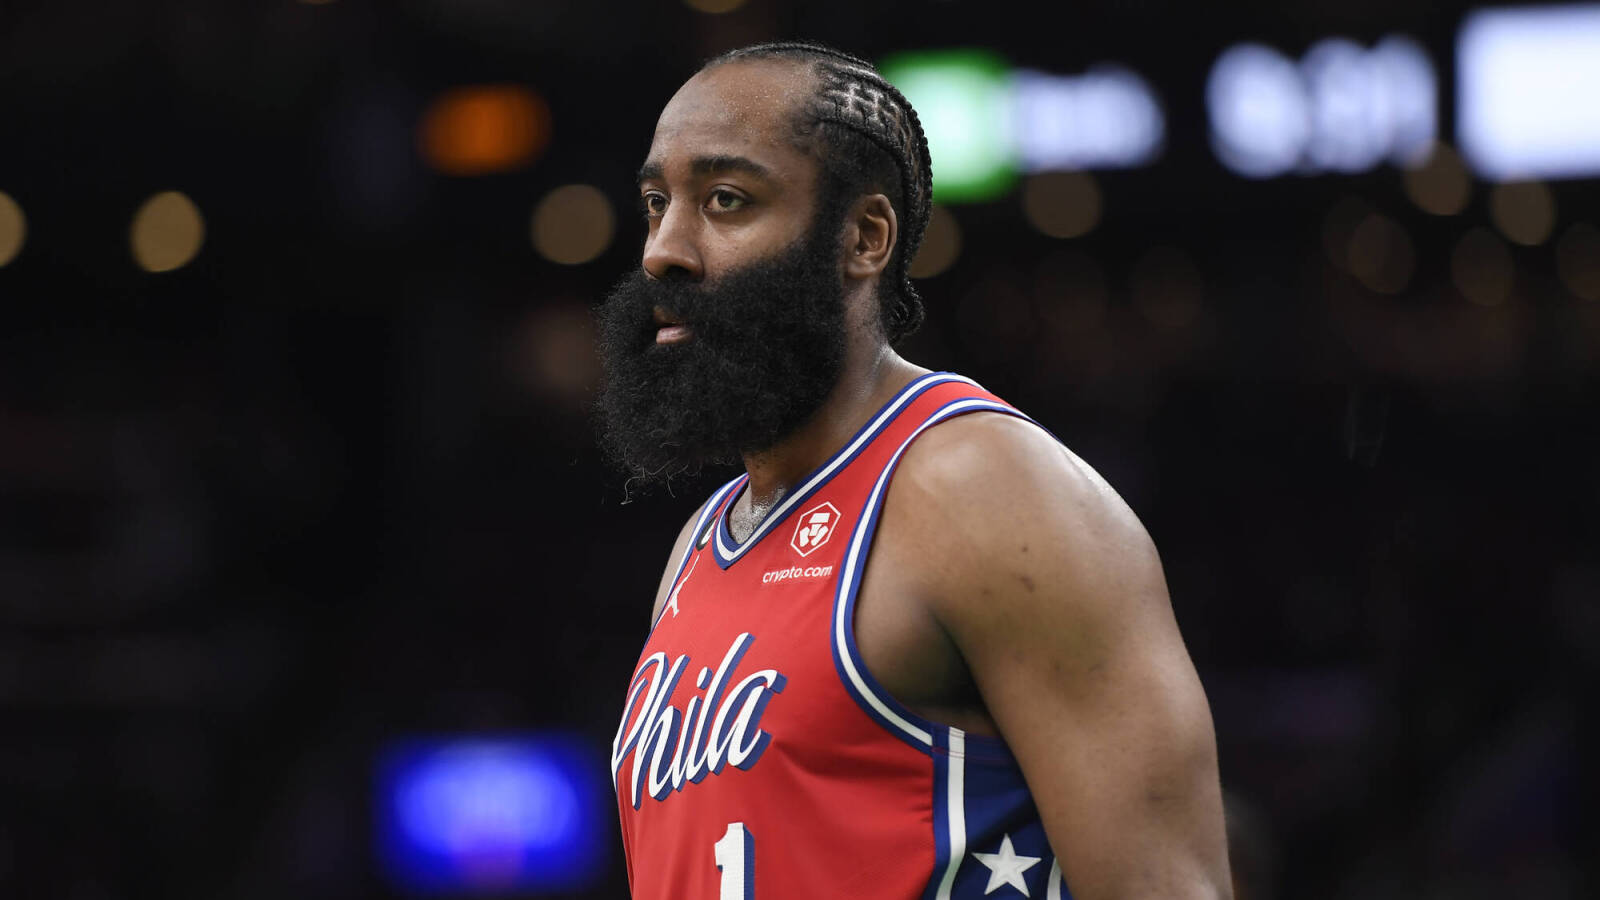 Colin Cowherd rips L.A. trading for James Harden: 'The Clippers got a well past their prime diva'